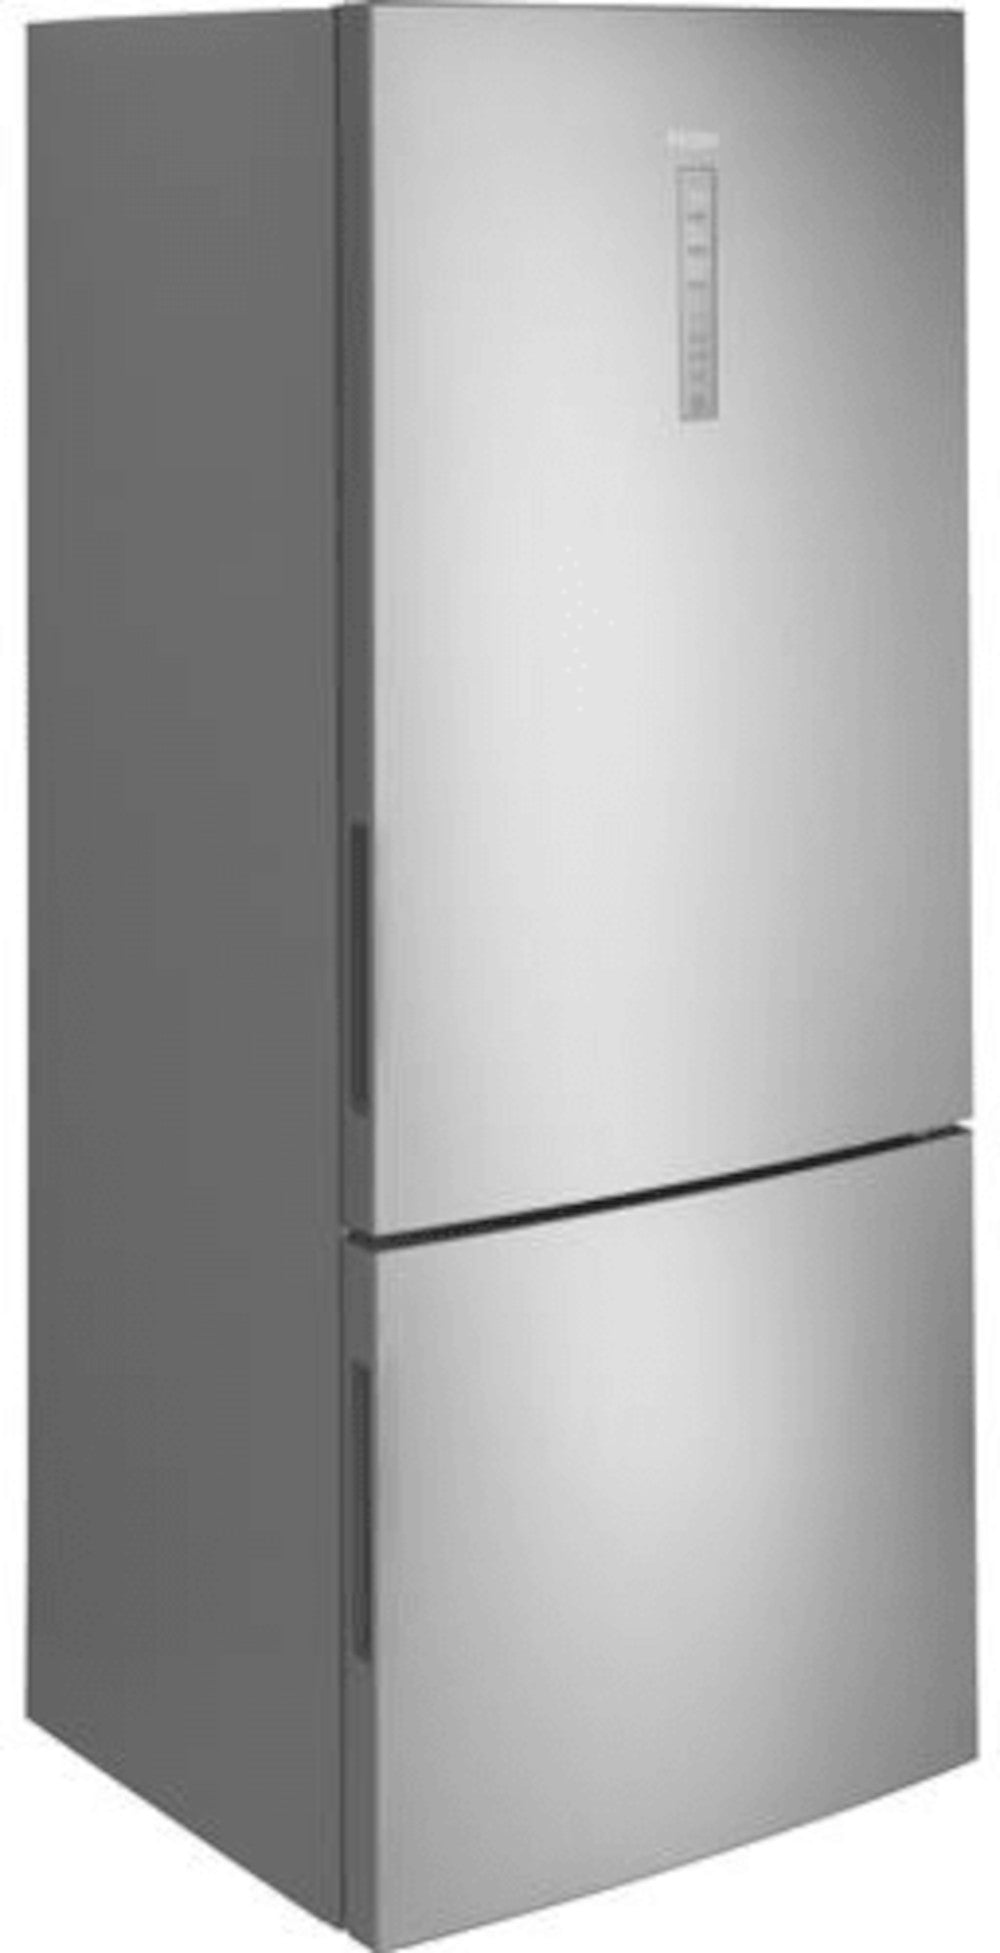 Haier - 27.6 Inch 15 cu. ft Bottom Mount Refrigerator in Stainless - HRB15N3BGS